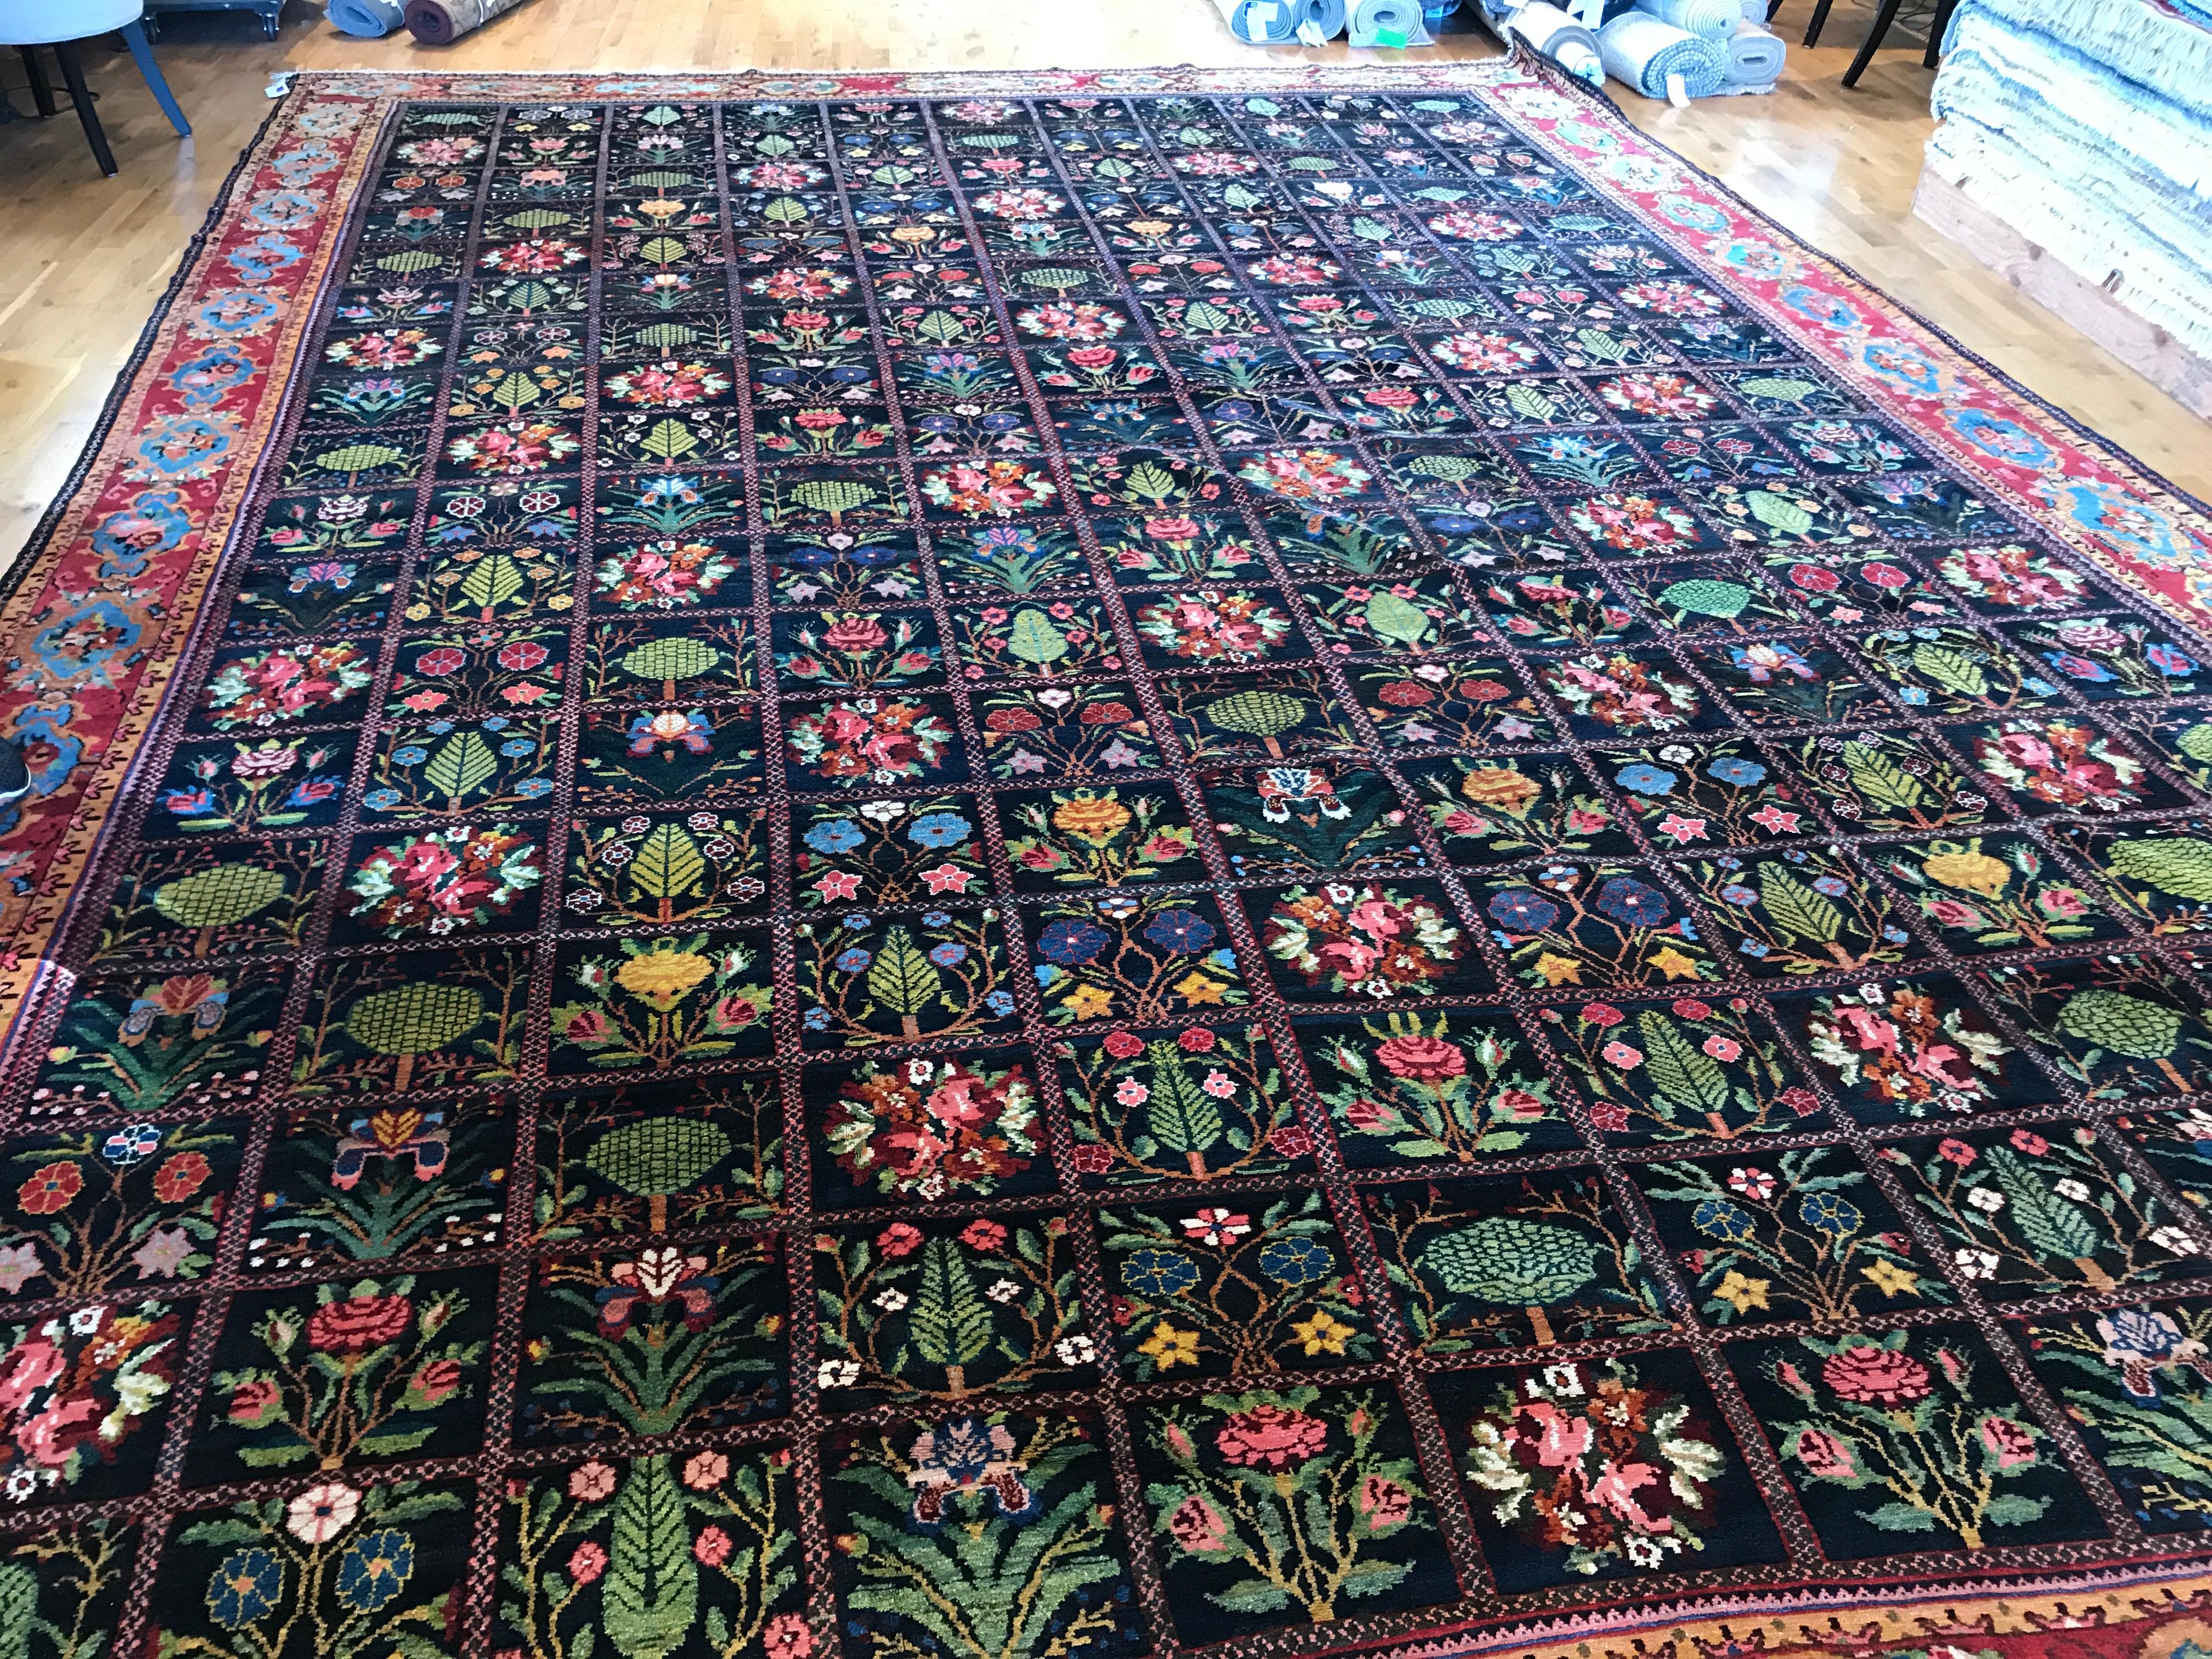 Antique Persian Bakhtiari Rug

Red floral border with geometric black field color. The field is compromise of symbolic flowers and trees that grows in the region. All wool, natural vegetal dyes, hand-knotted in Iran.